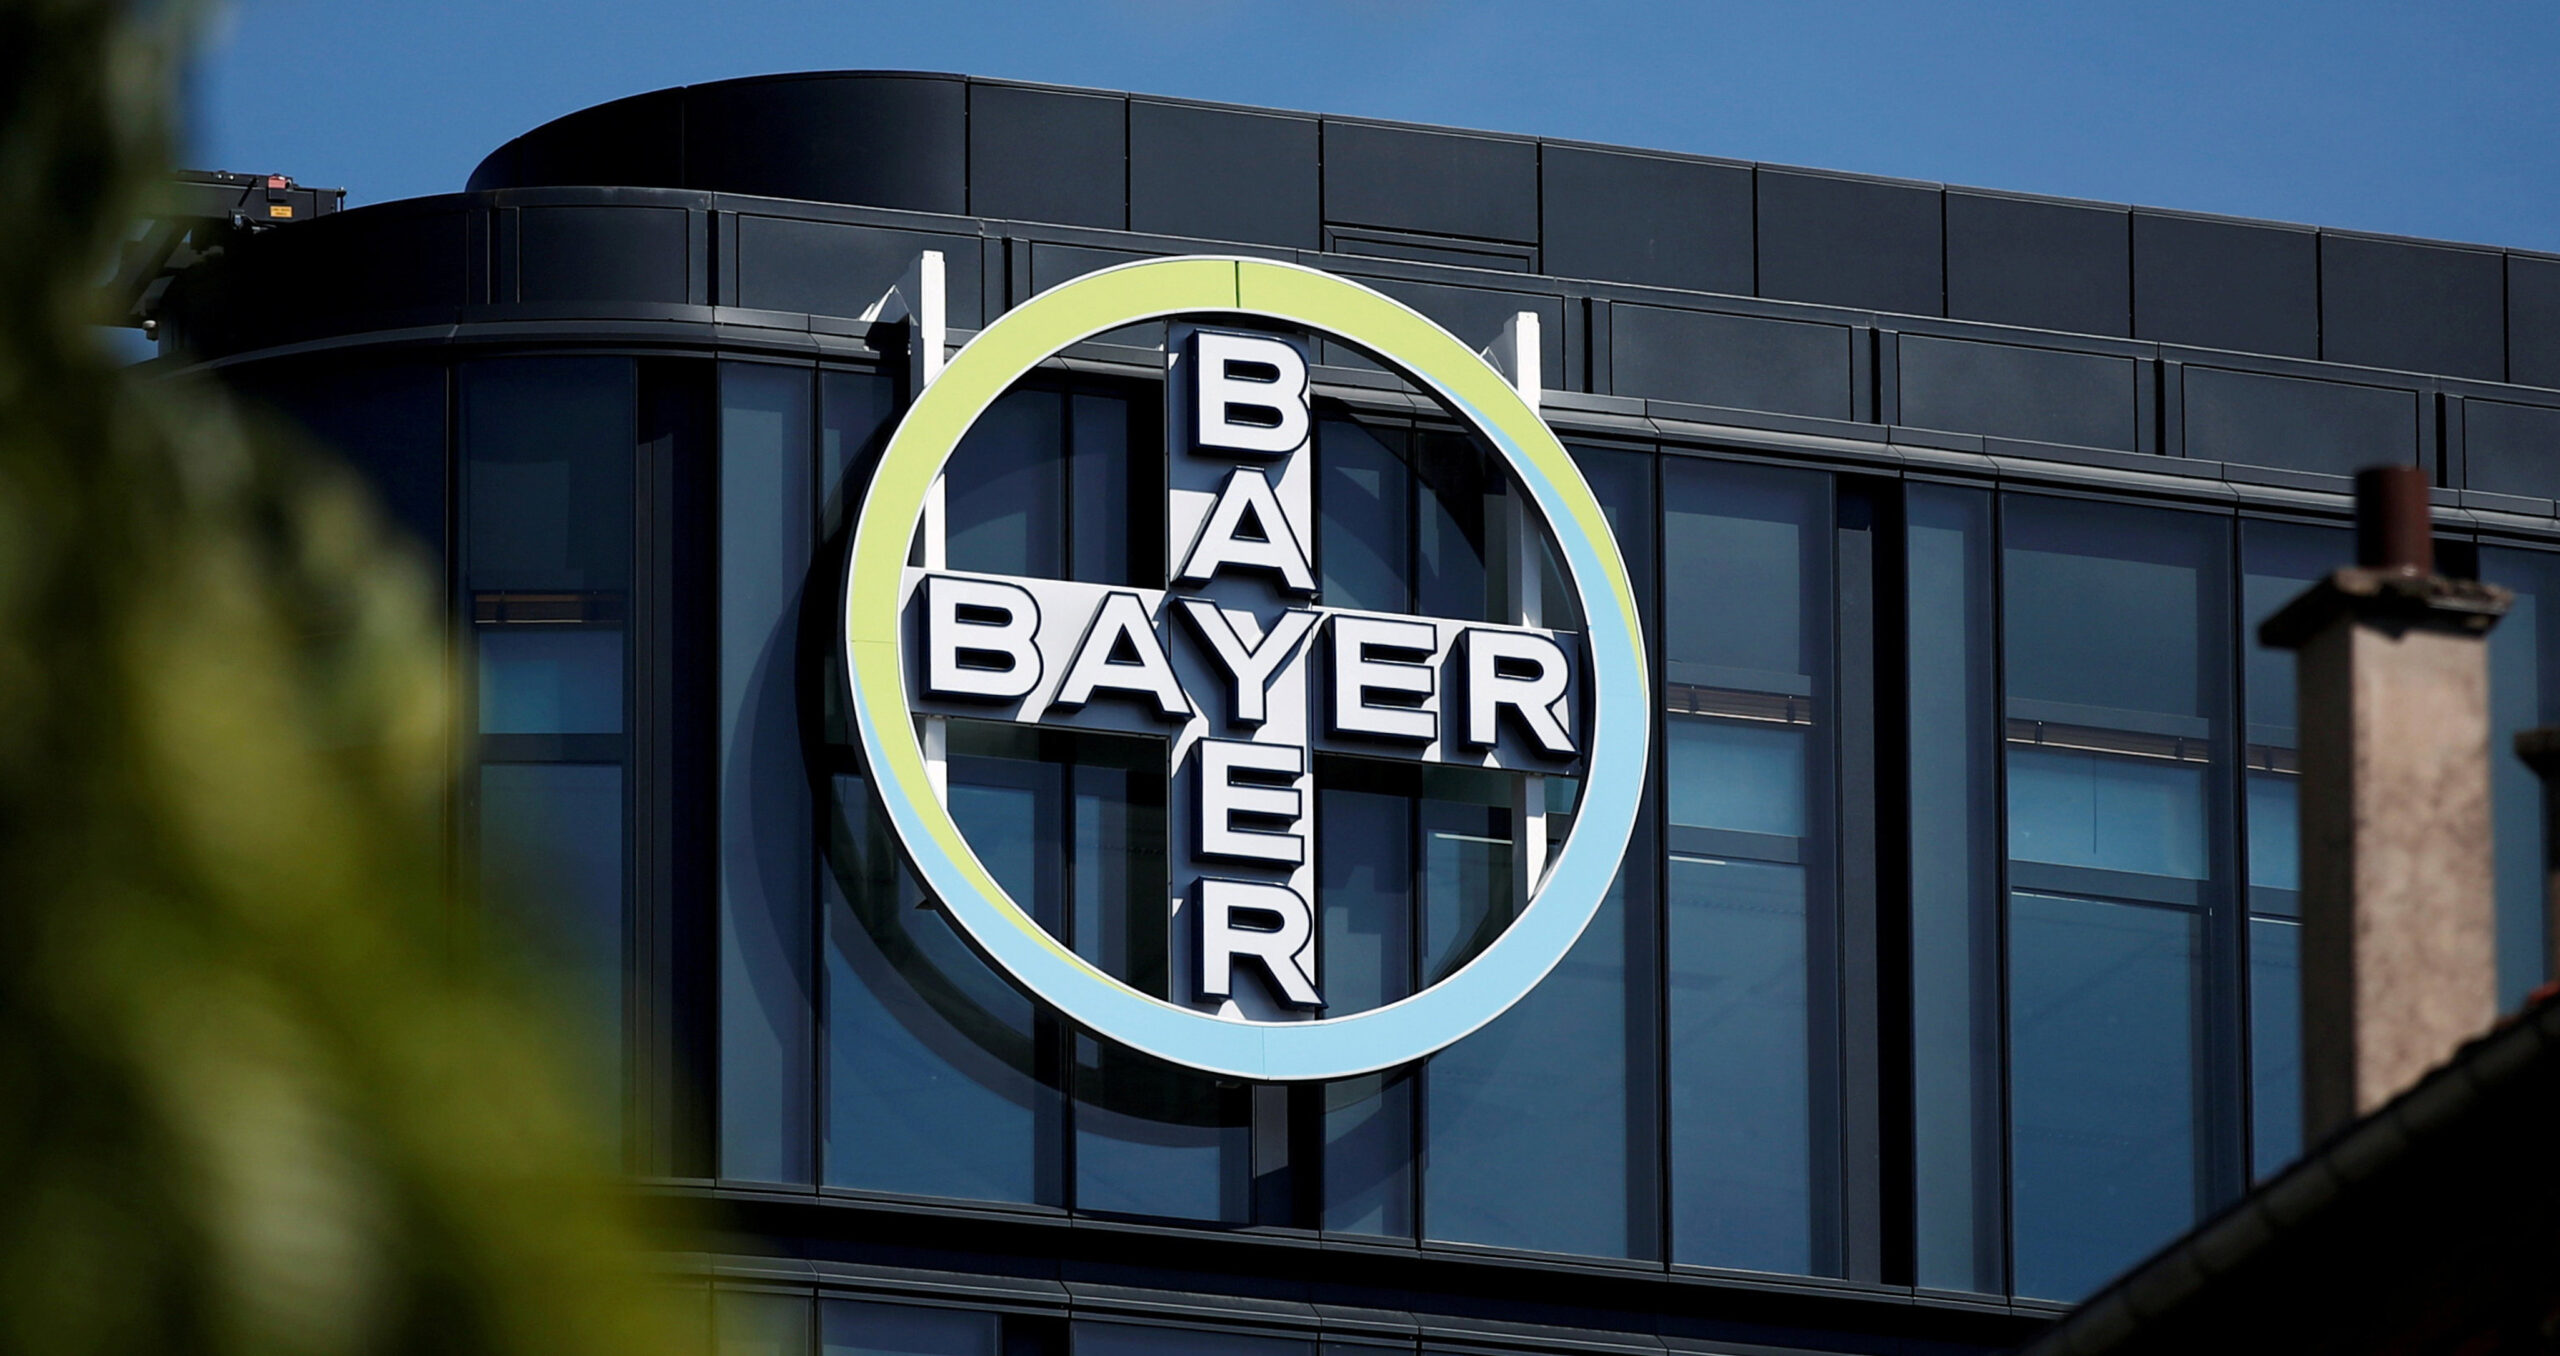 Bayer defines regenerative agriculture as ‘increasing food production, farm incomes and resilience in a changing climate while renewing nature’ (Photo: REUTERS/Benoit Tessier) 